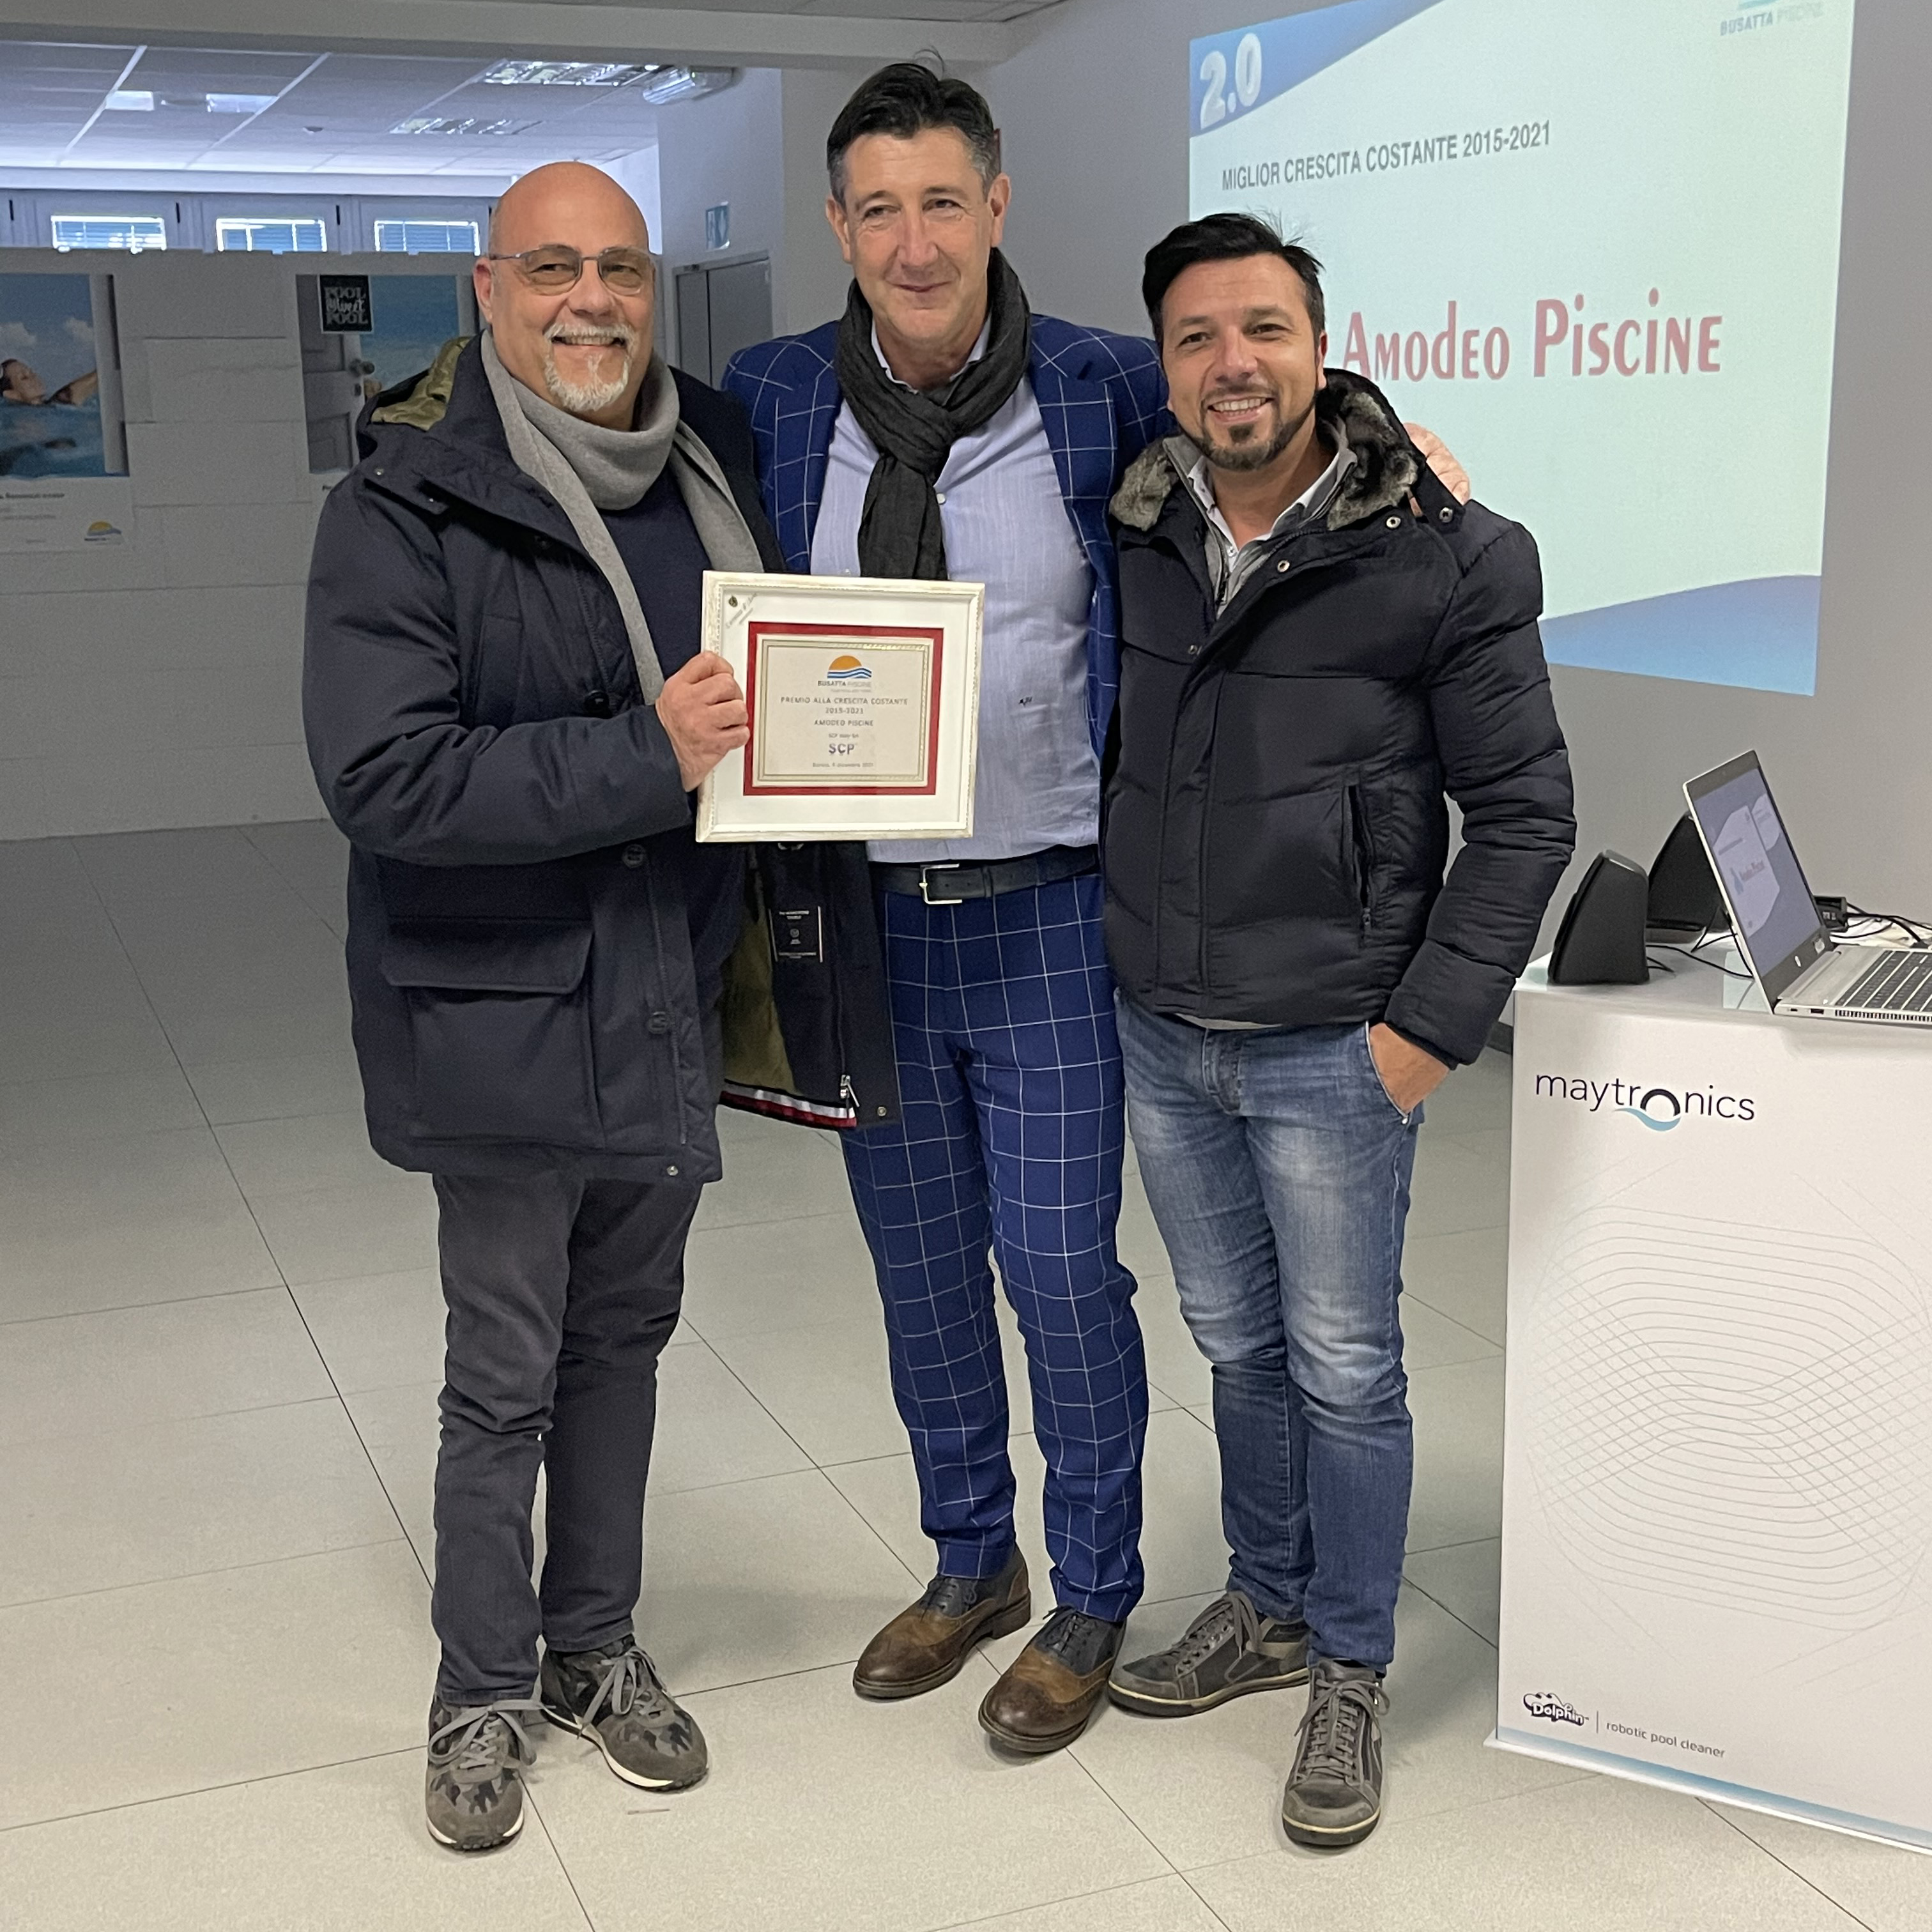 2015-2021 Constant Growth Award, Amodeo Piscine in Palermo